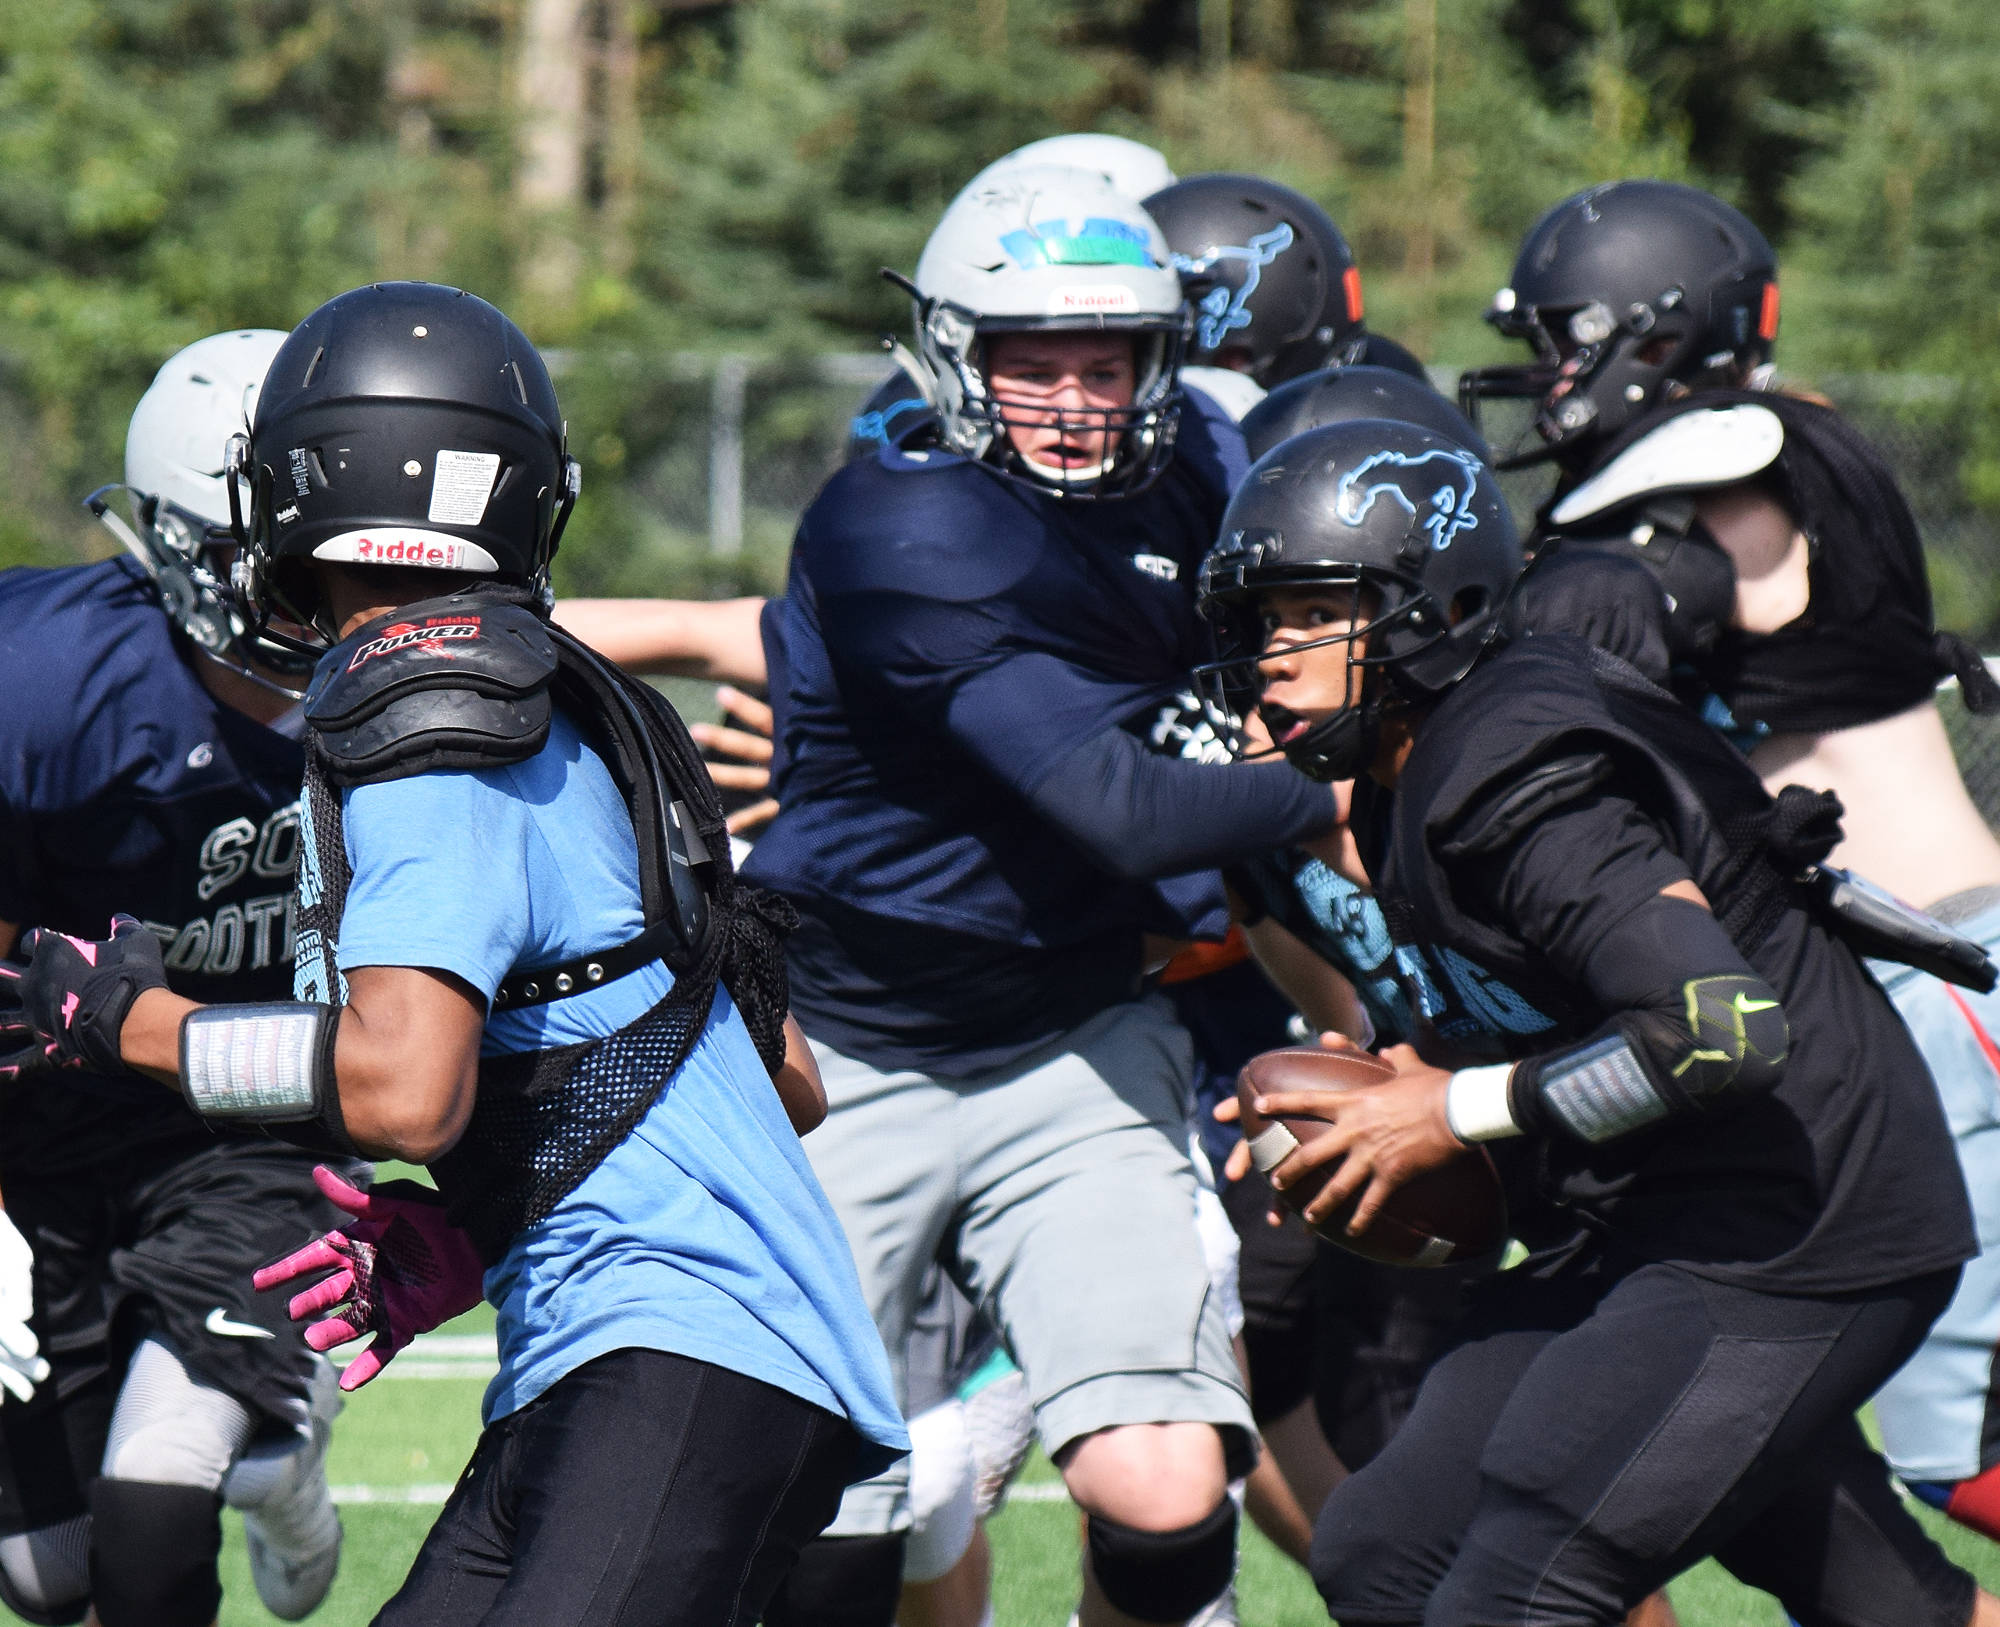 Varsity members of the Soldotna and Chugiak football teams clash Saturday in a preseason scrimmage at Justin Maile Field in Soldotna. (Photo by Joey Klecka/Peninsula Clarion)